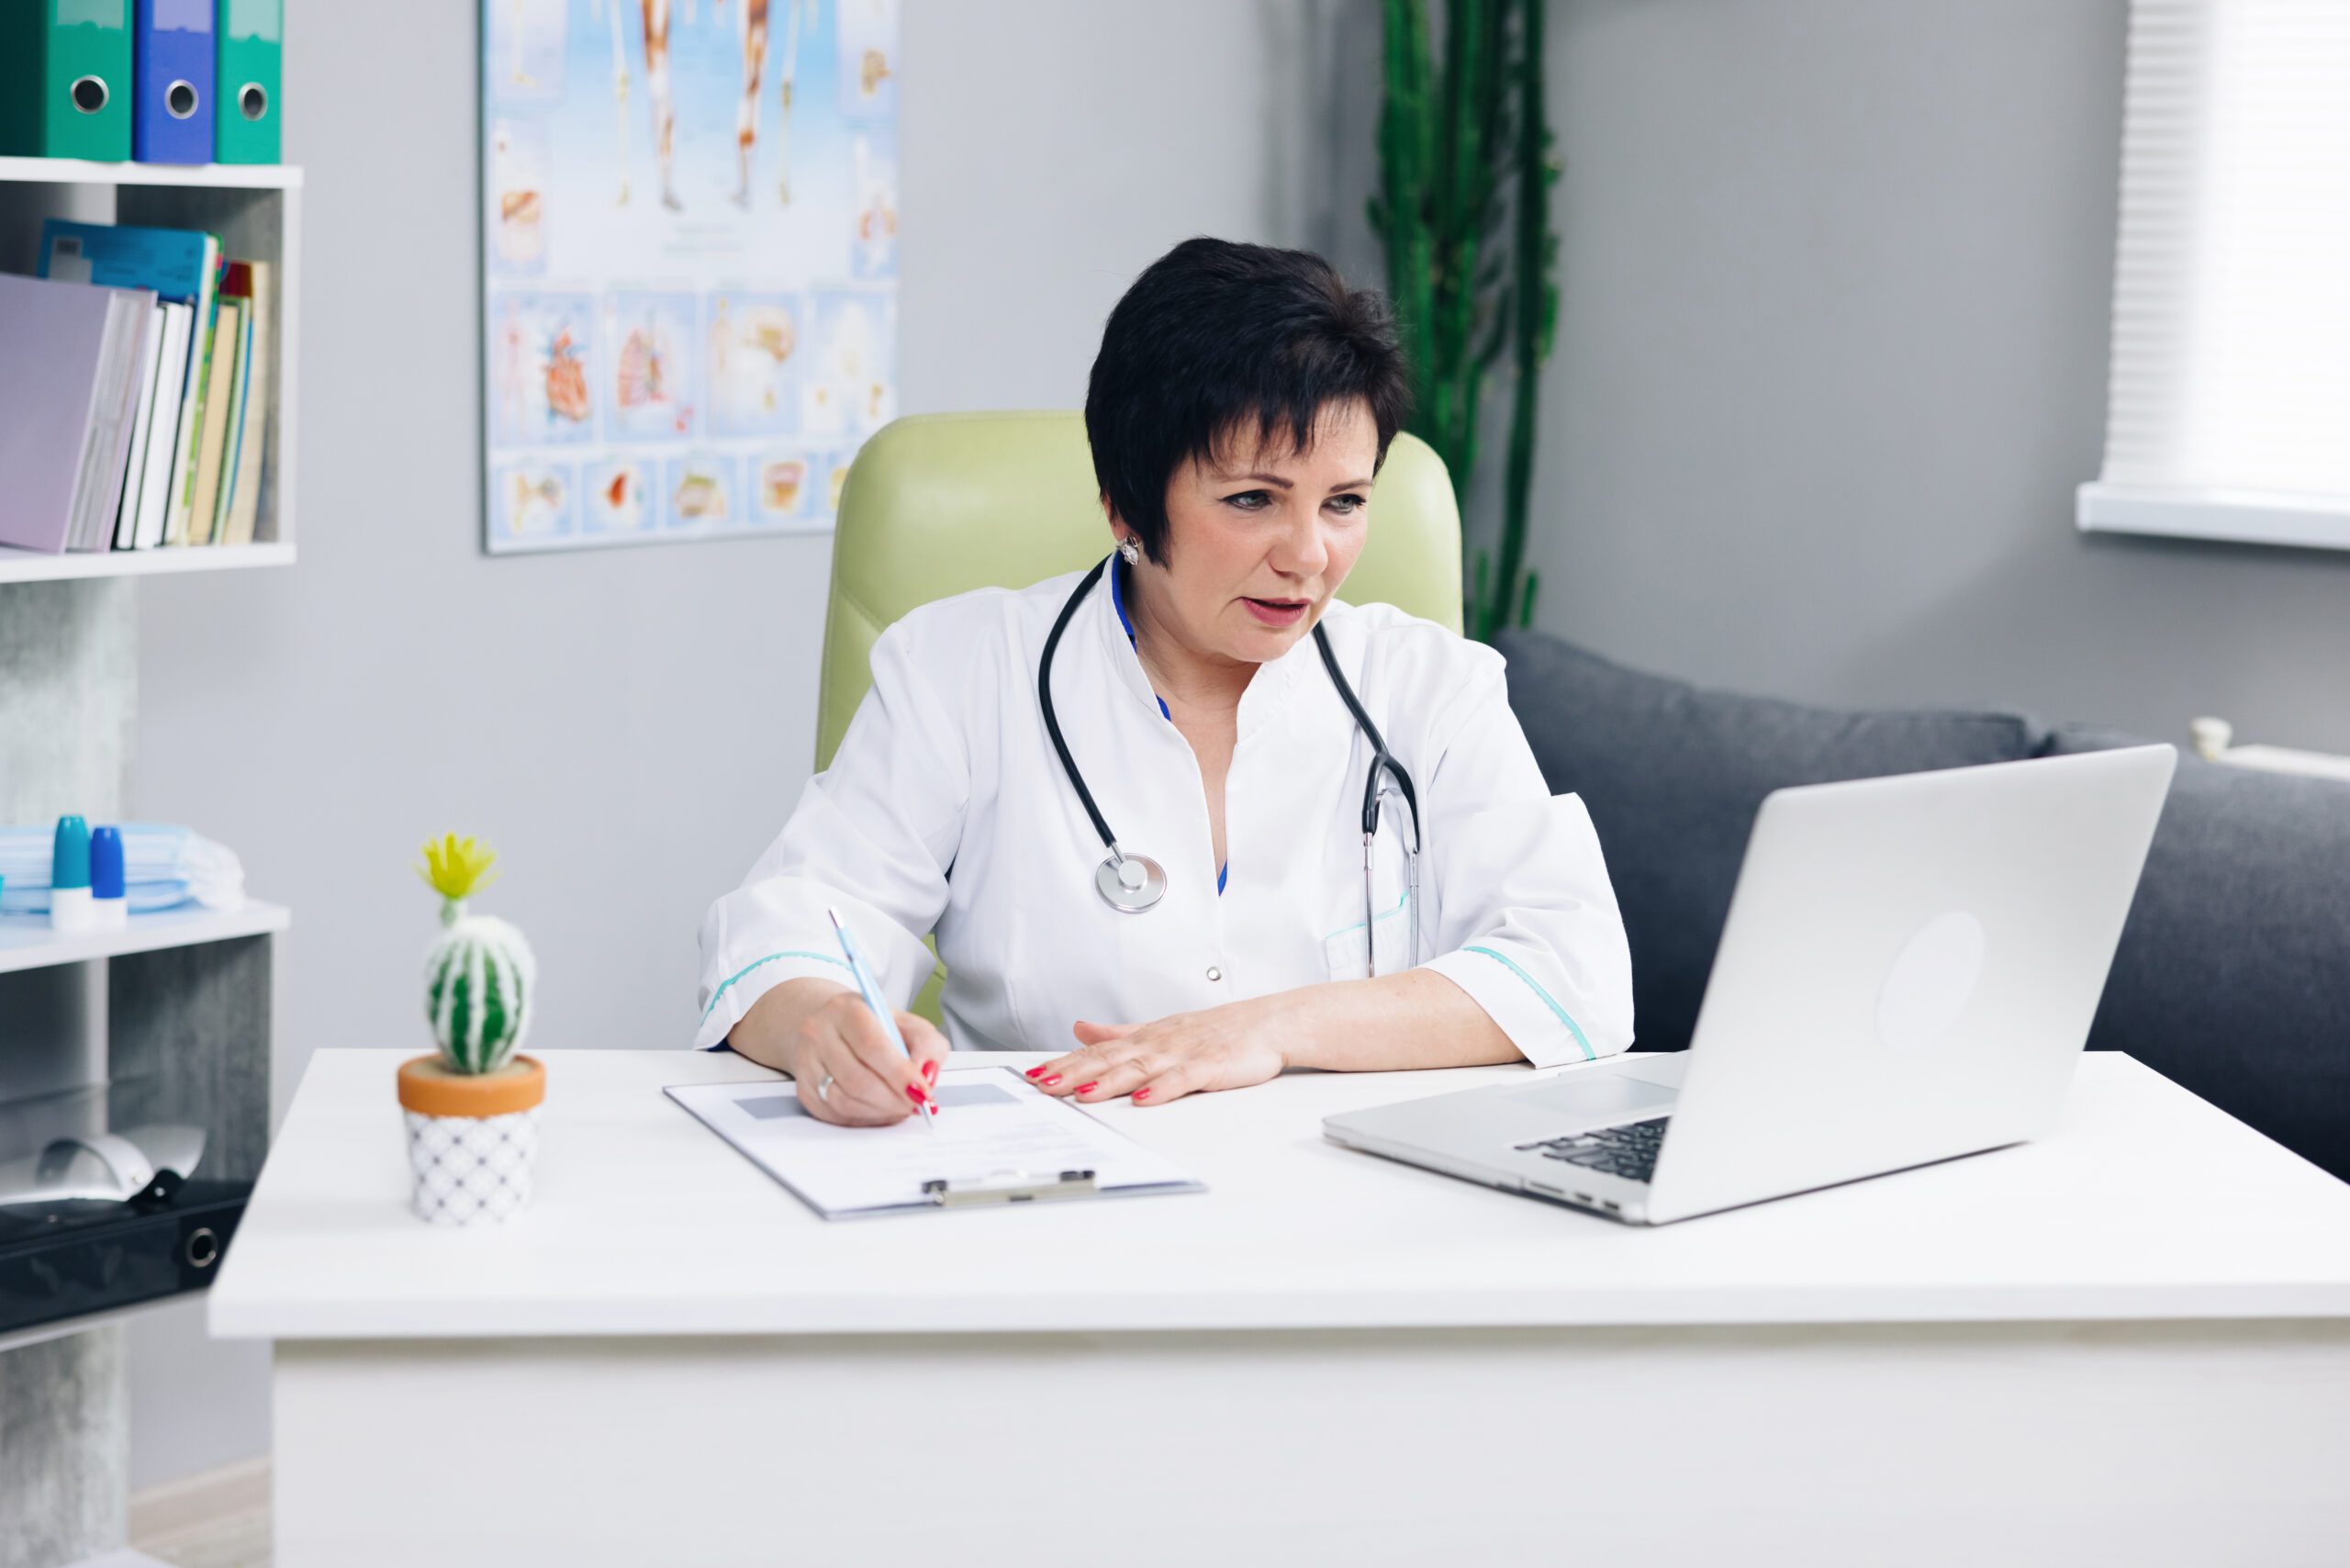 Female doctor talk with patient make telemedicine online webcam video call. Woman therapist videoconferencing on computer in remote telemedicine laptop virtual chat. Telehealth concept.